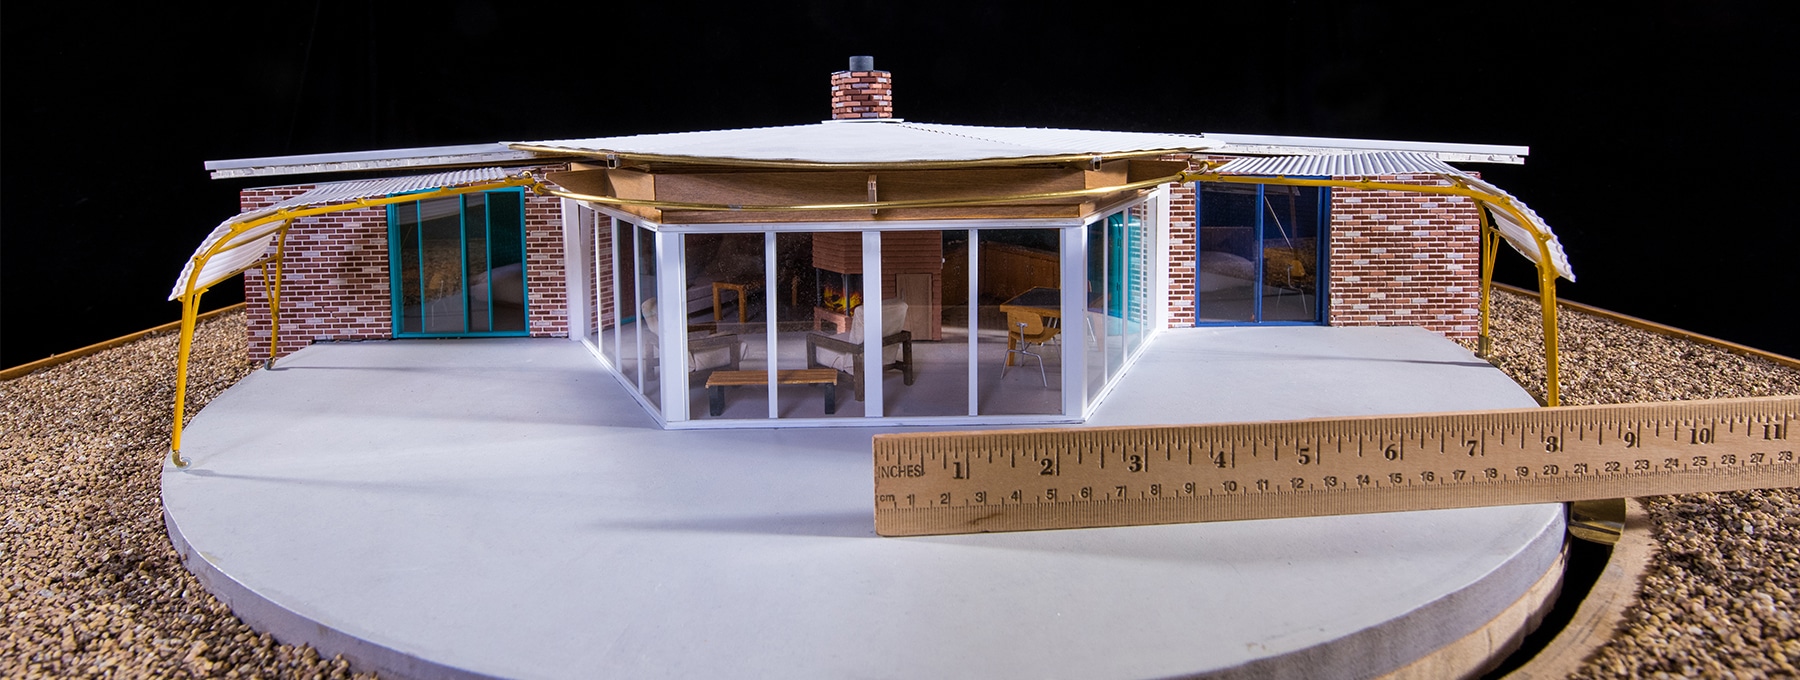 Ball Paylore Miniature House Photo with Ruler